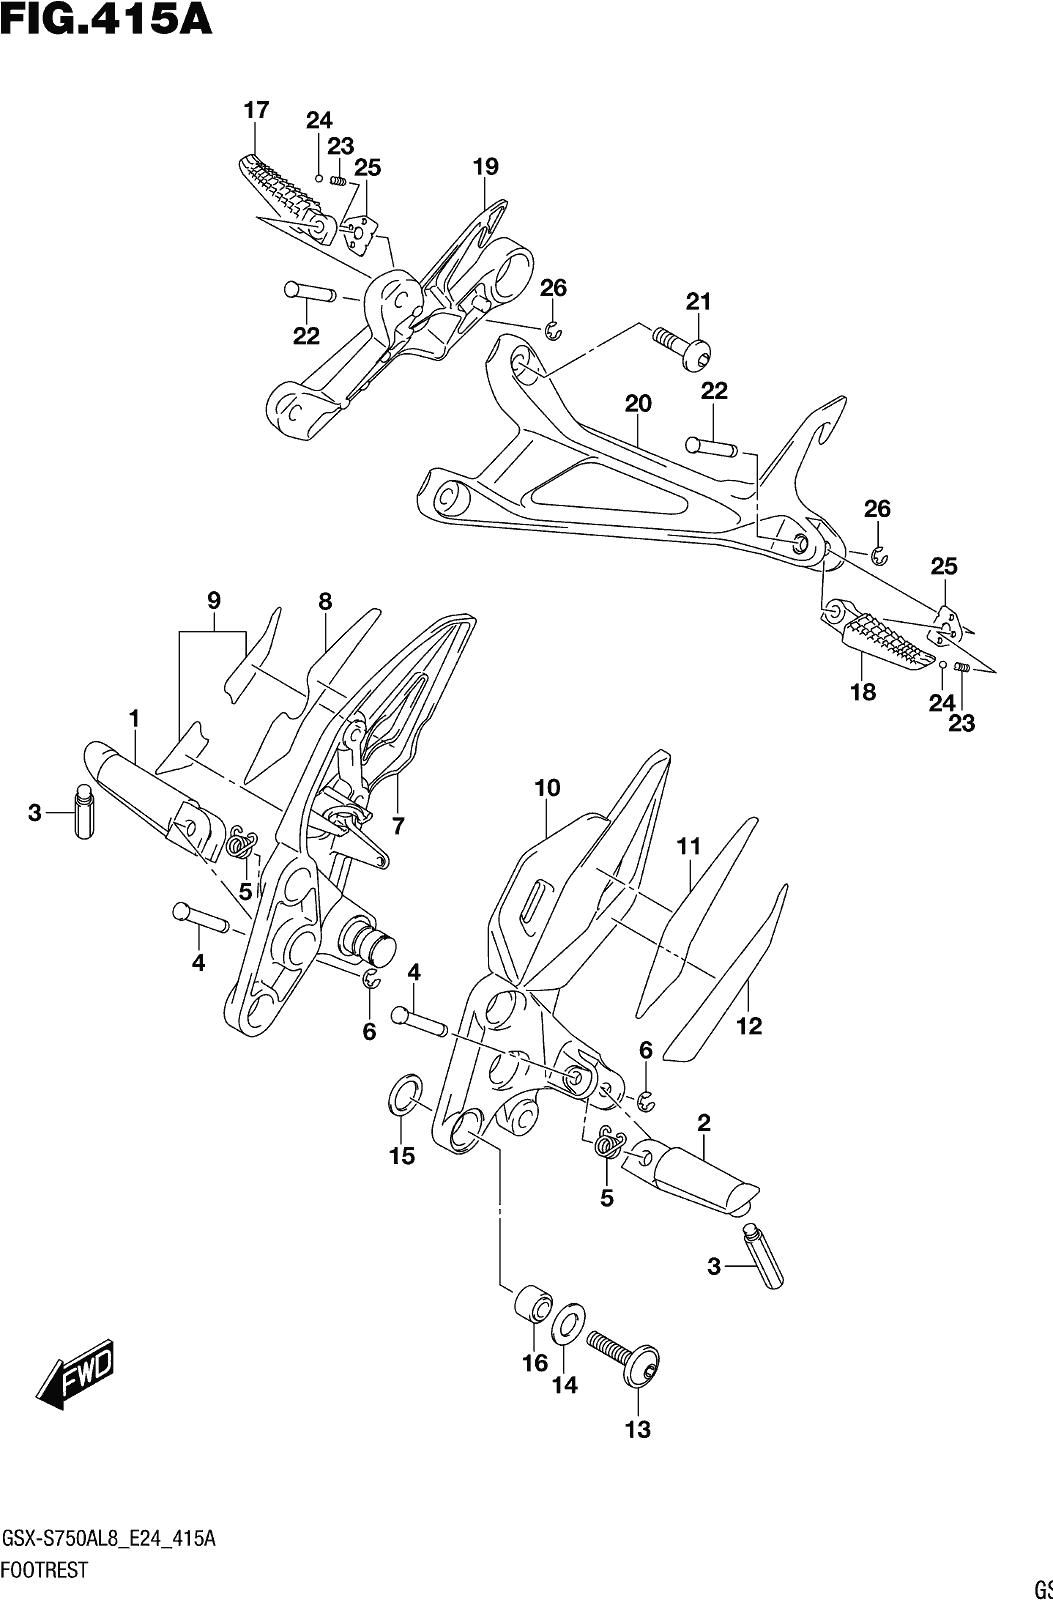 Fig.415a Footrest